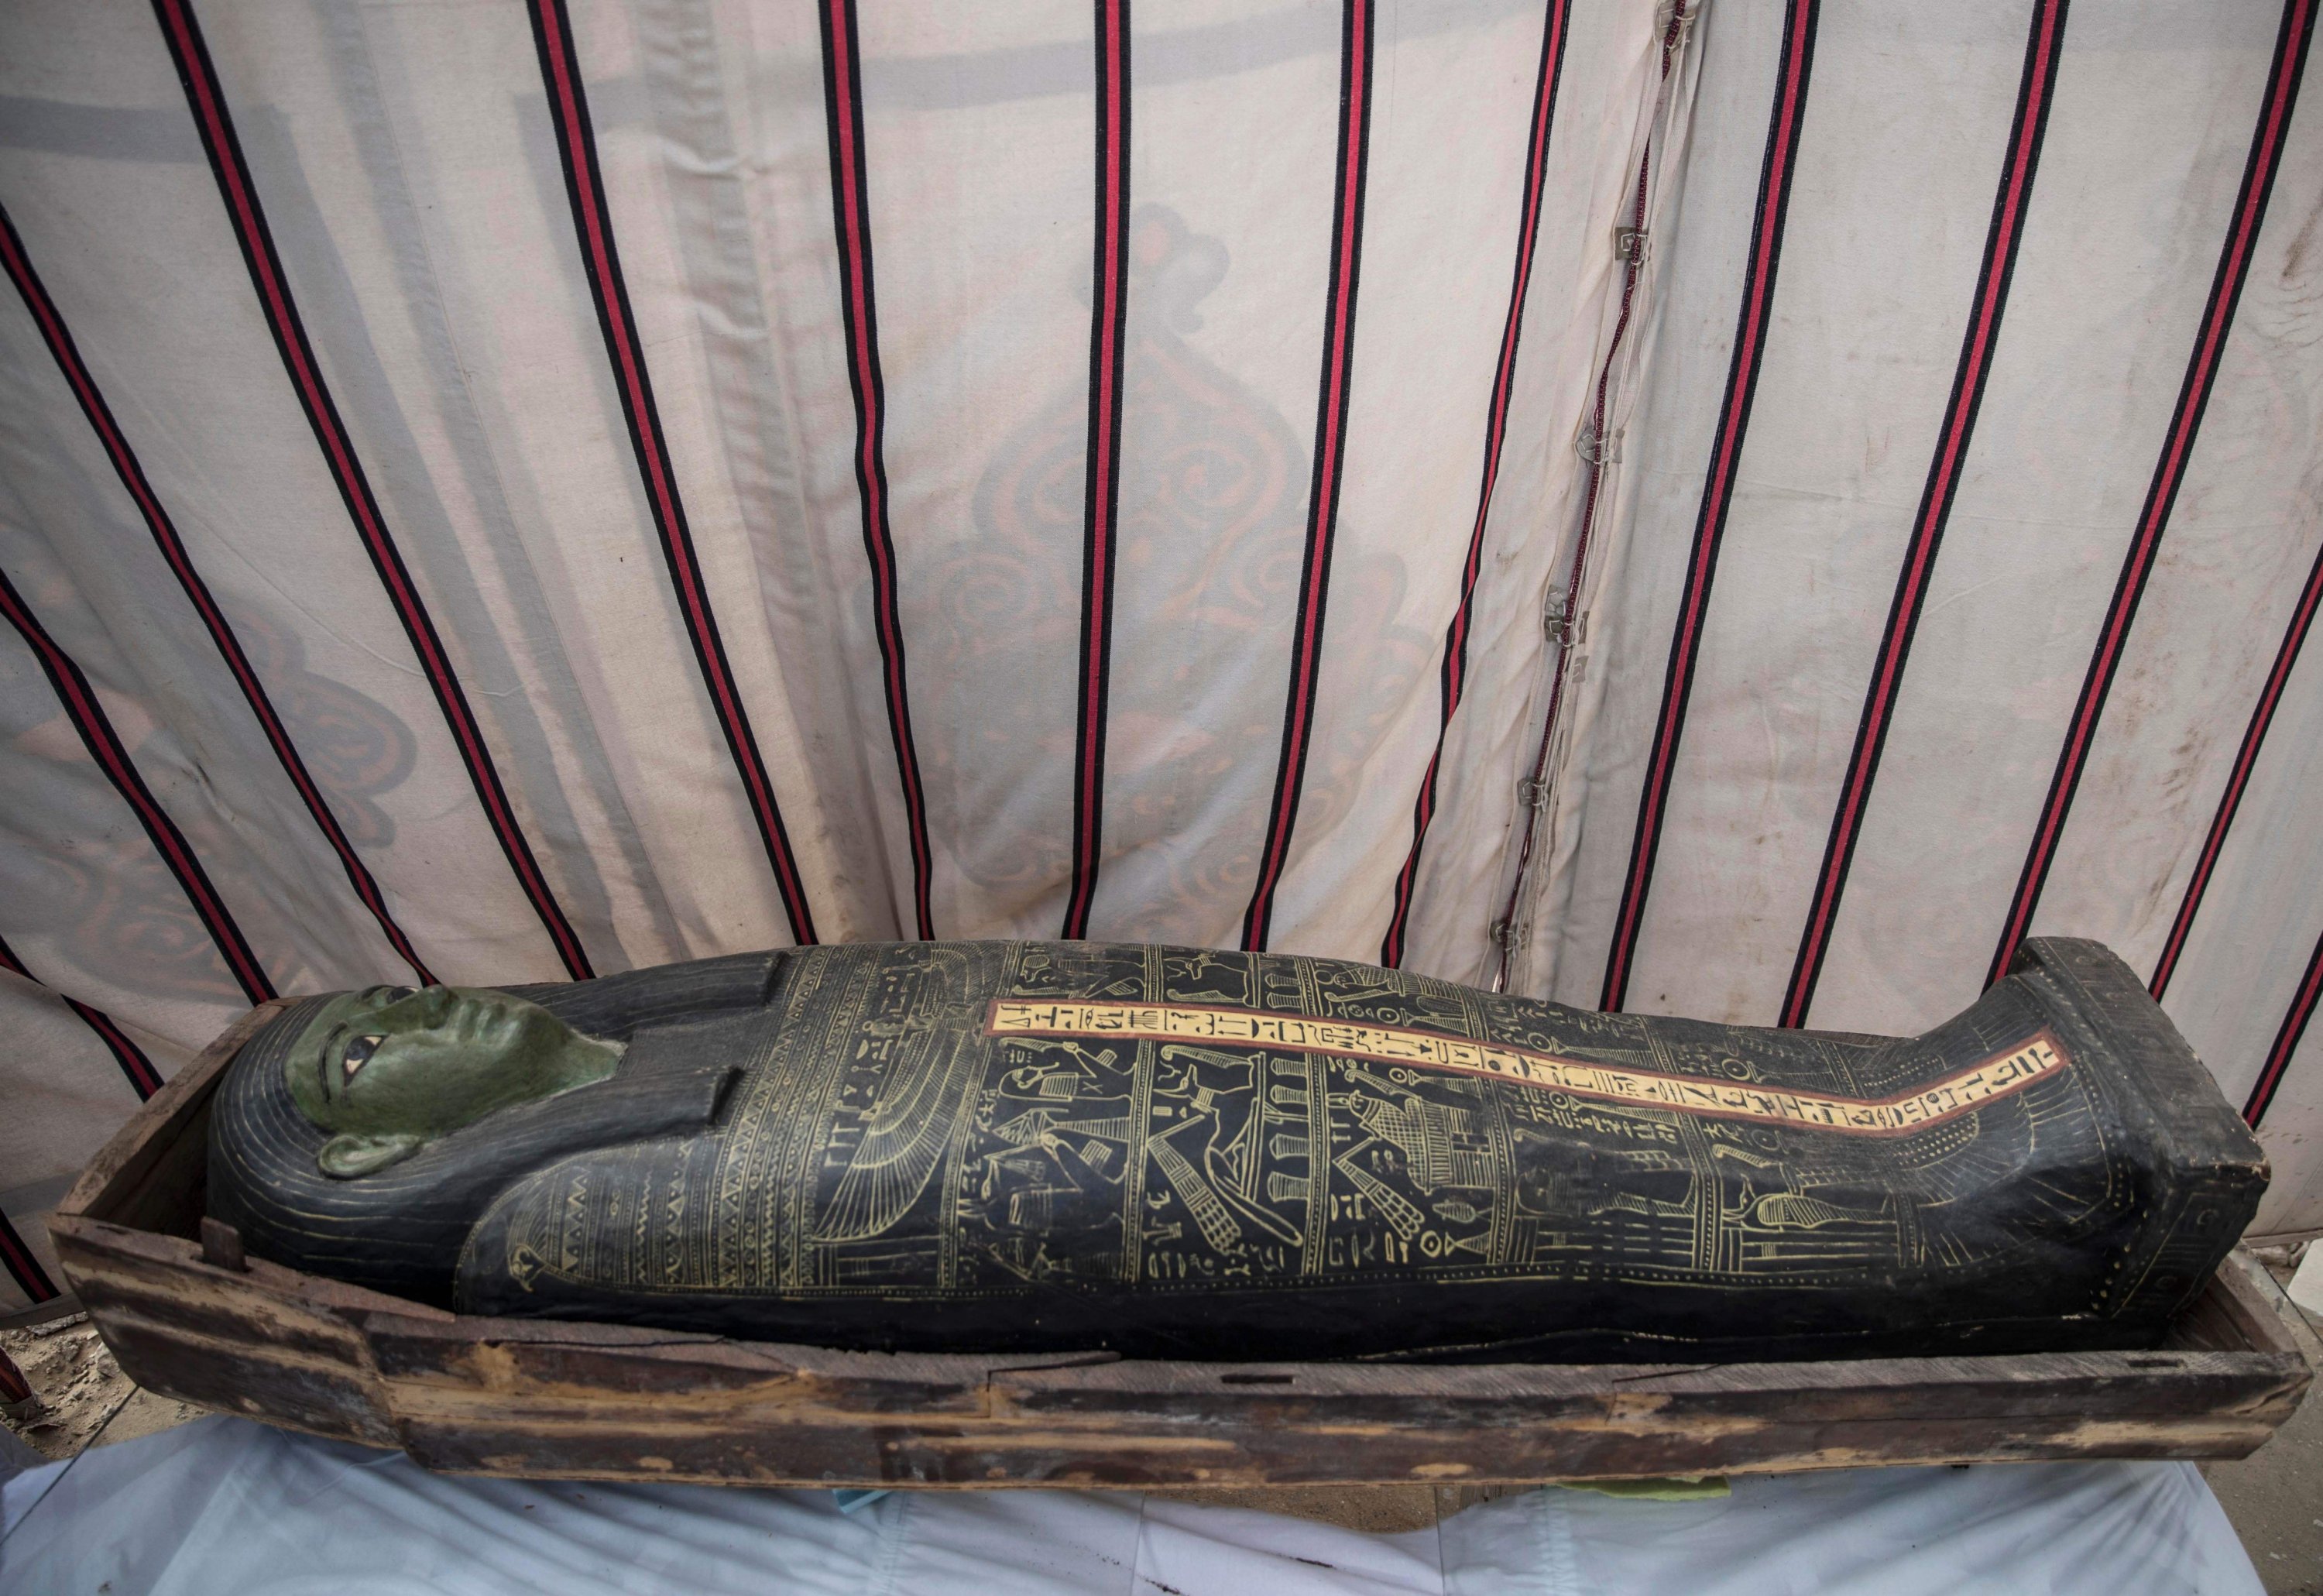 A sarcophagus is displayed during the official announcement of the discovery at Egypt's Saqqara necropolis, south of Cairo, Jan. 17, 2021. (AFP Photo)